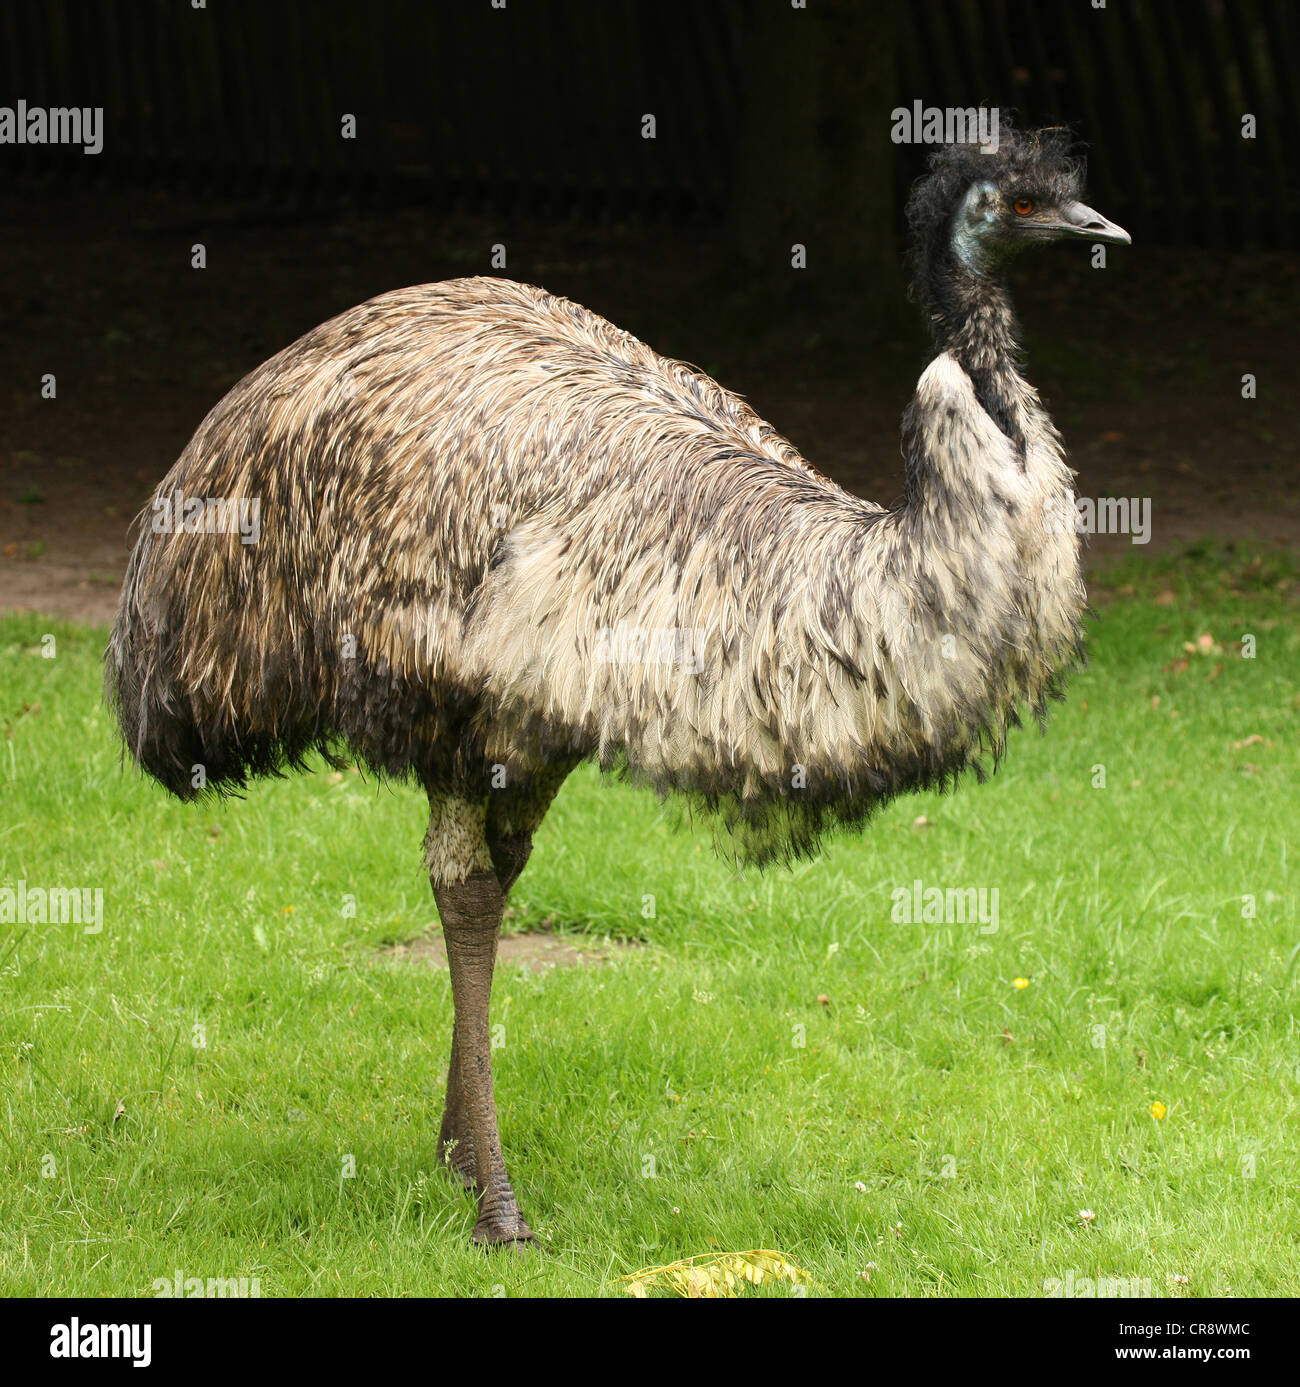 Emu High Resolution Stock Photography and Images - Alamy